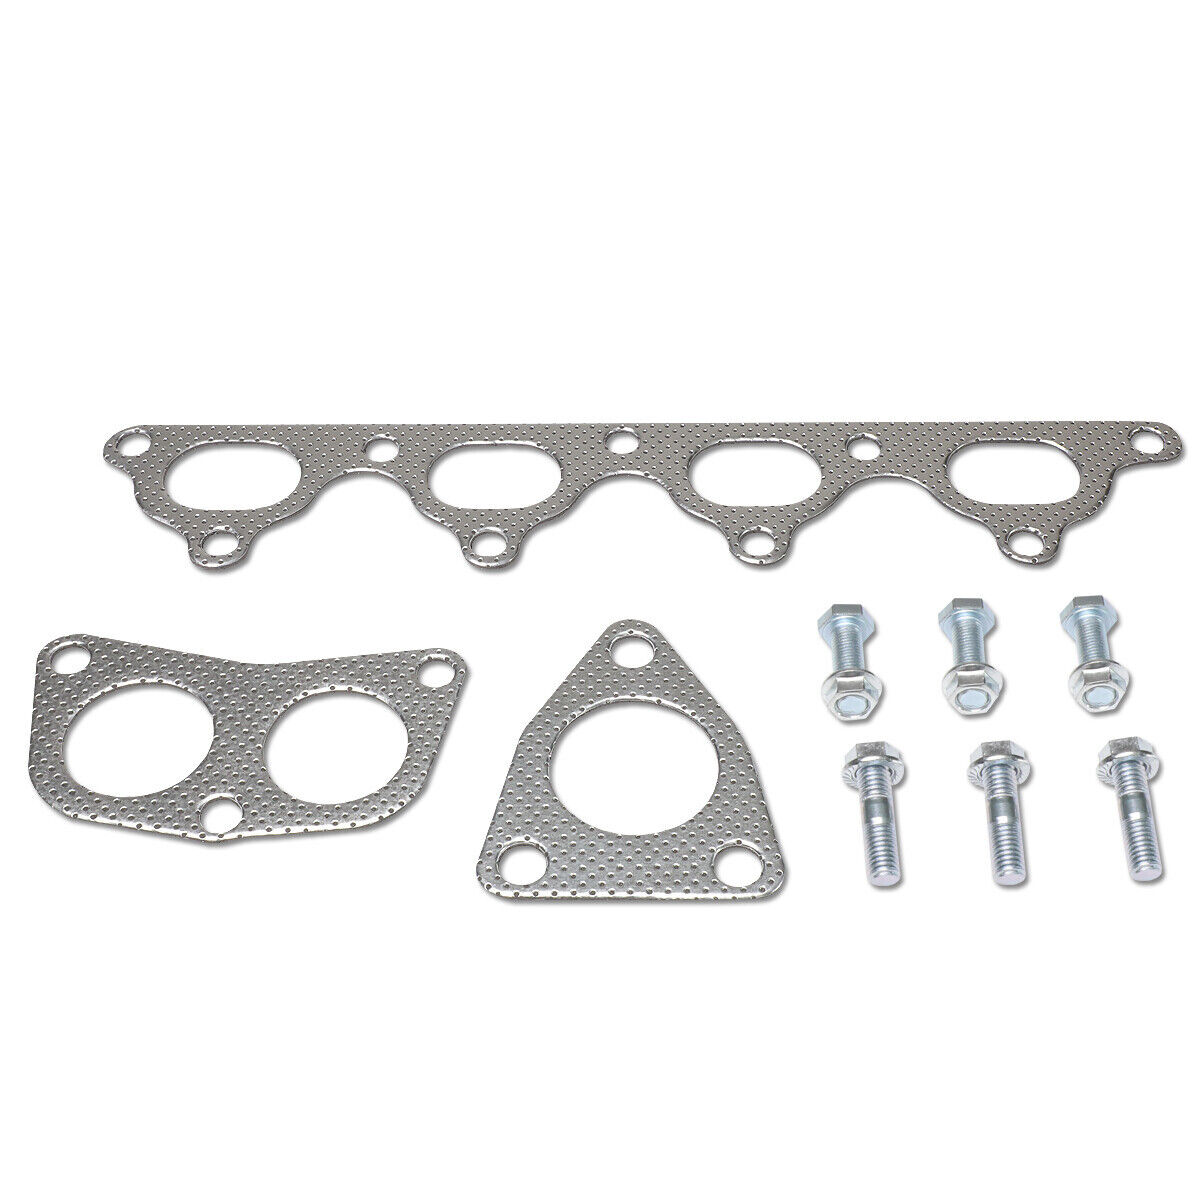 Fit 90-96 Honda Accord Prelude H23A1 2.3L DOHC Exhaust Manifold Header Gasket